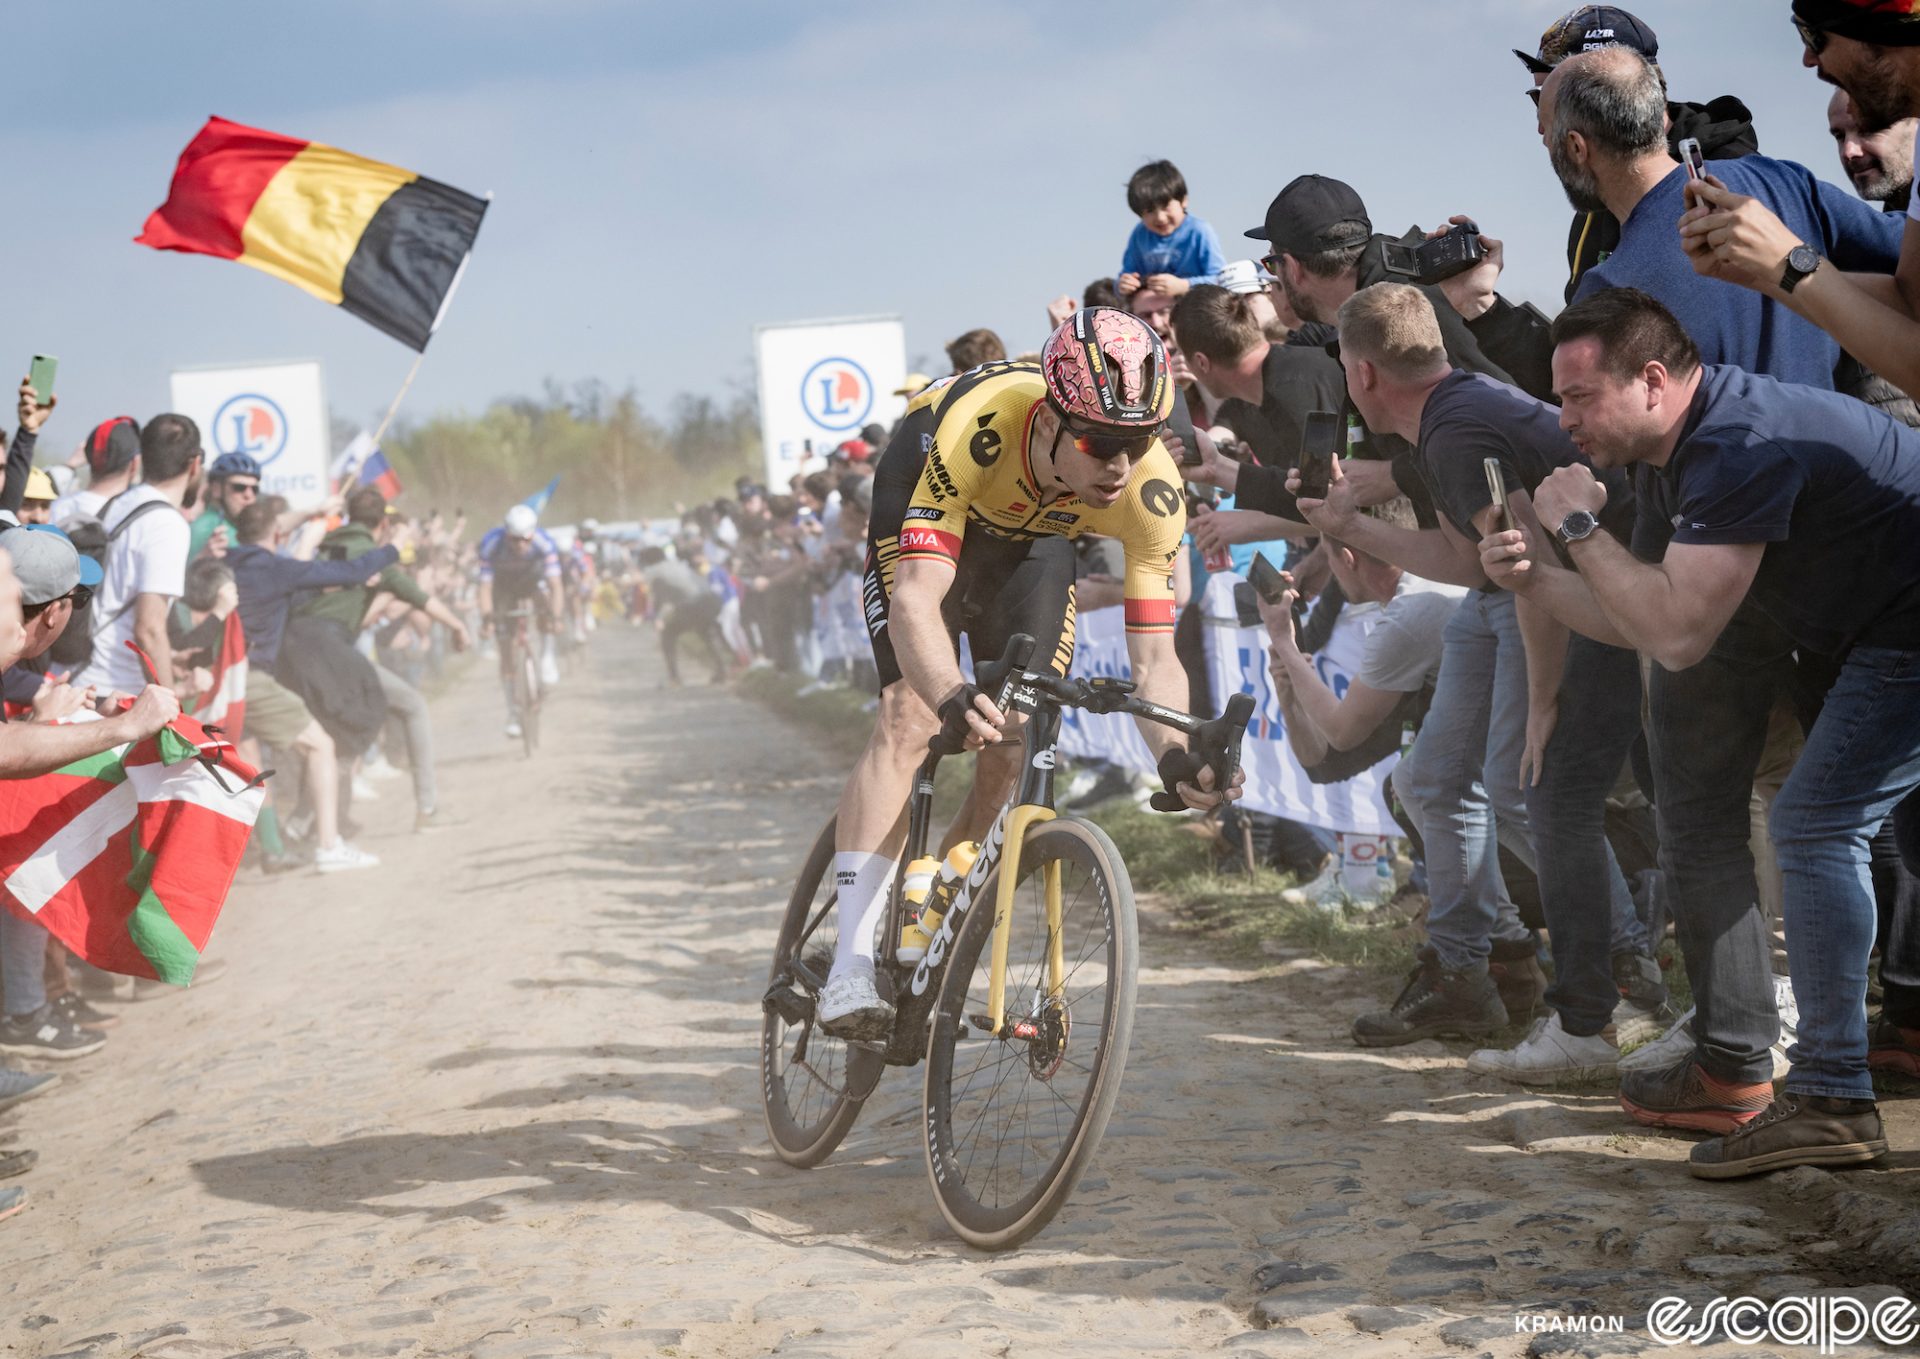 Wout van Aert attacks on the cobbles at the Carrefour de l'Arbre in the 2023 Paris-Roubaix. His chief rival, Mathieu van der Poel, is momentarily distanced behind.